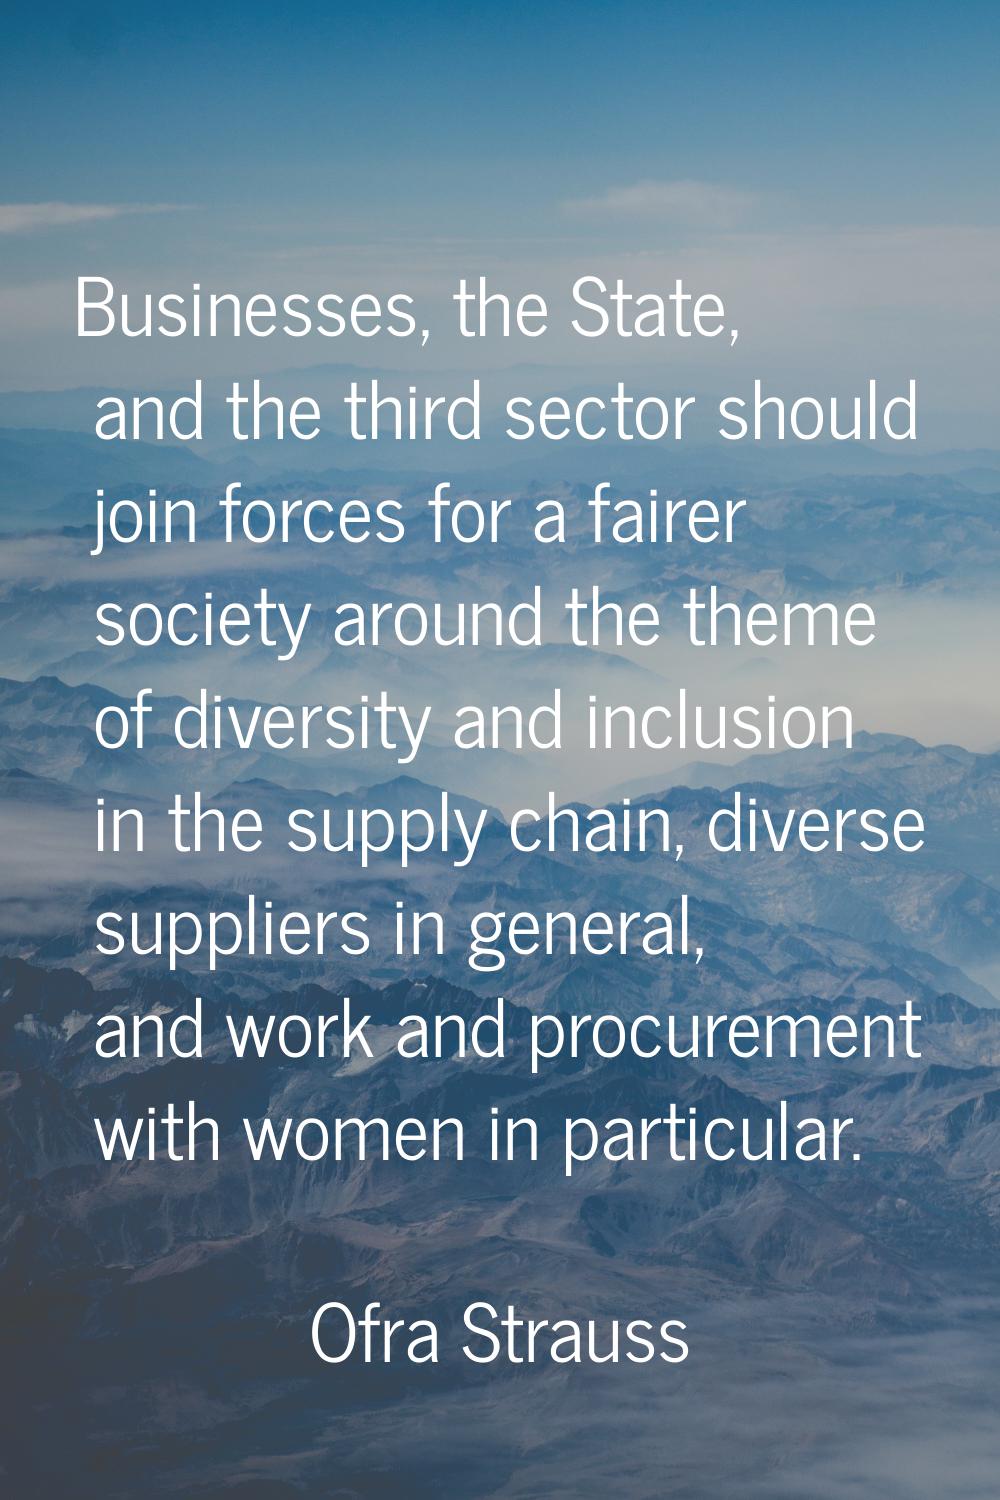 Businesses, the State, and the third sector should join forces for a fairer society around the them